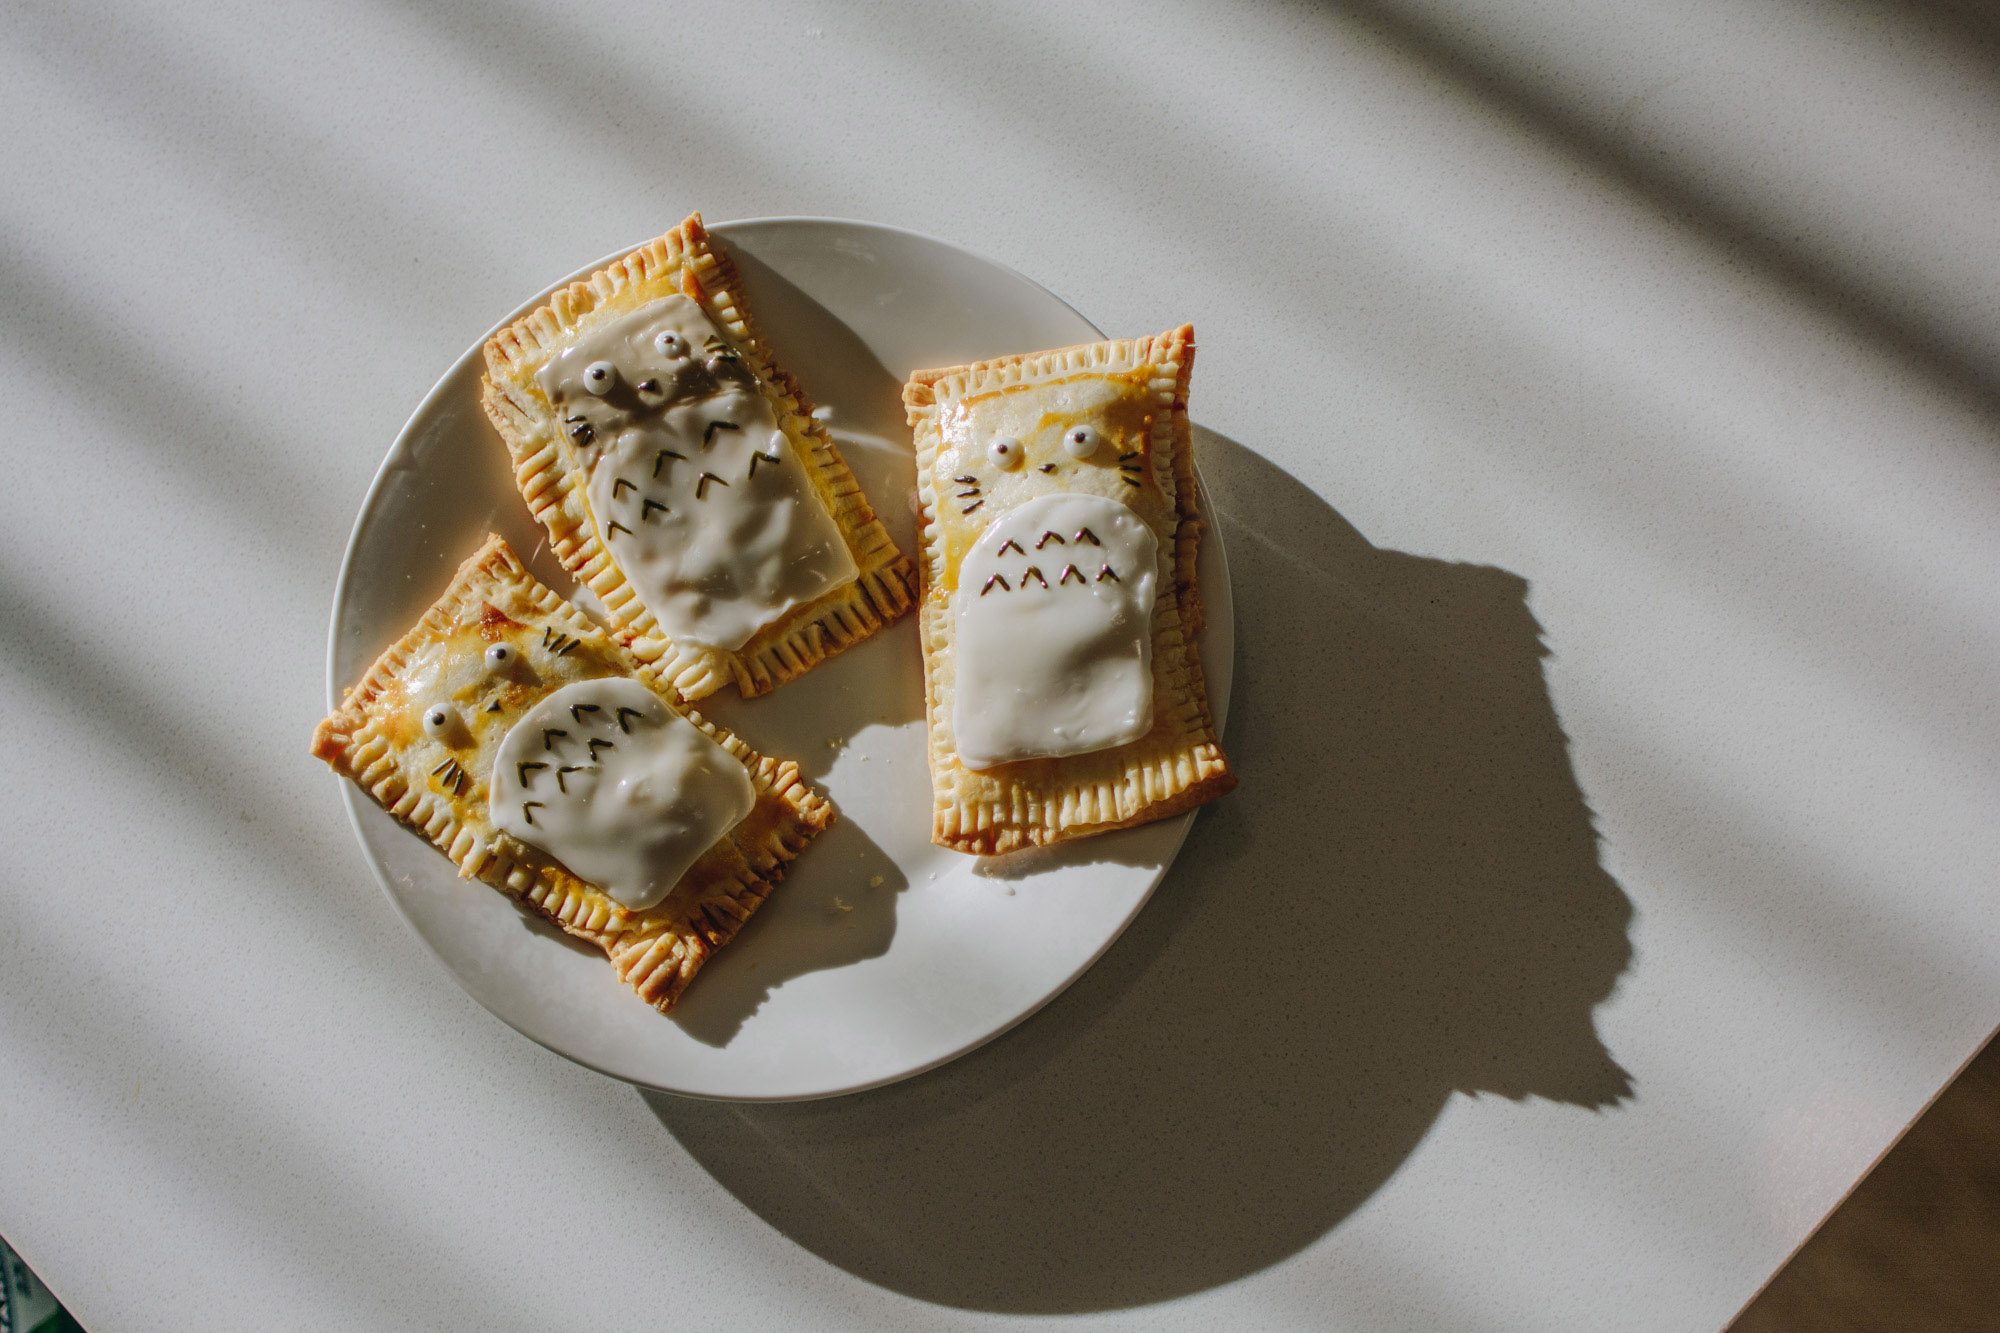 Arizona lifestyle blogger Demi Bang shares how she made Totoro toaster pastries.